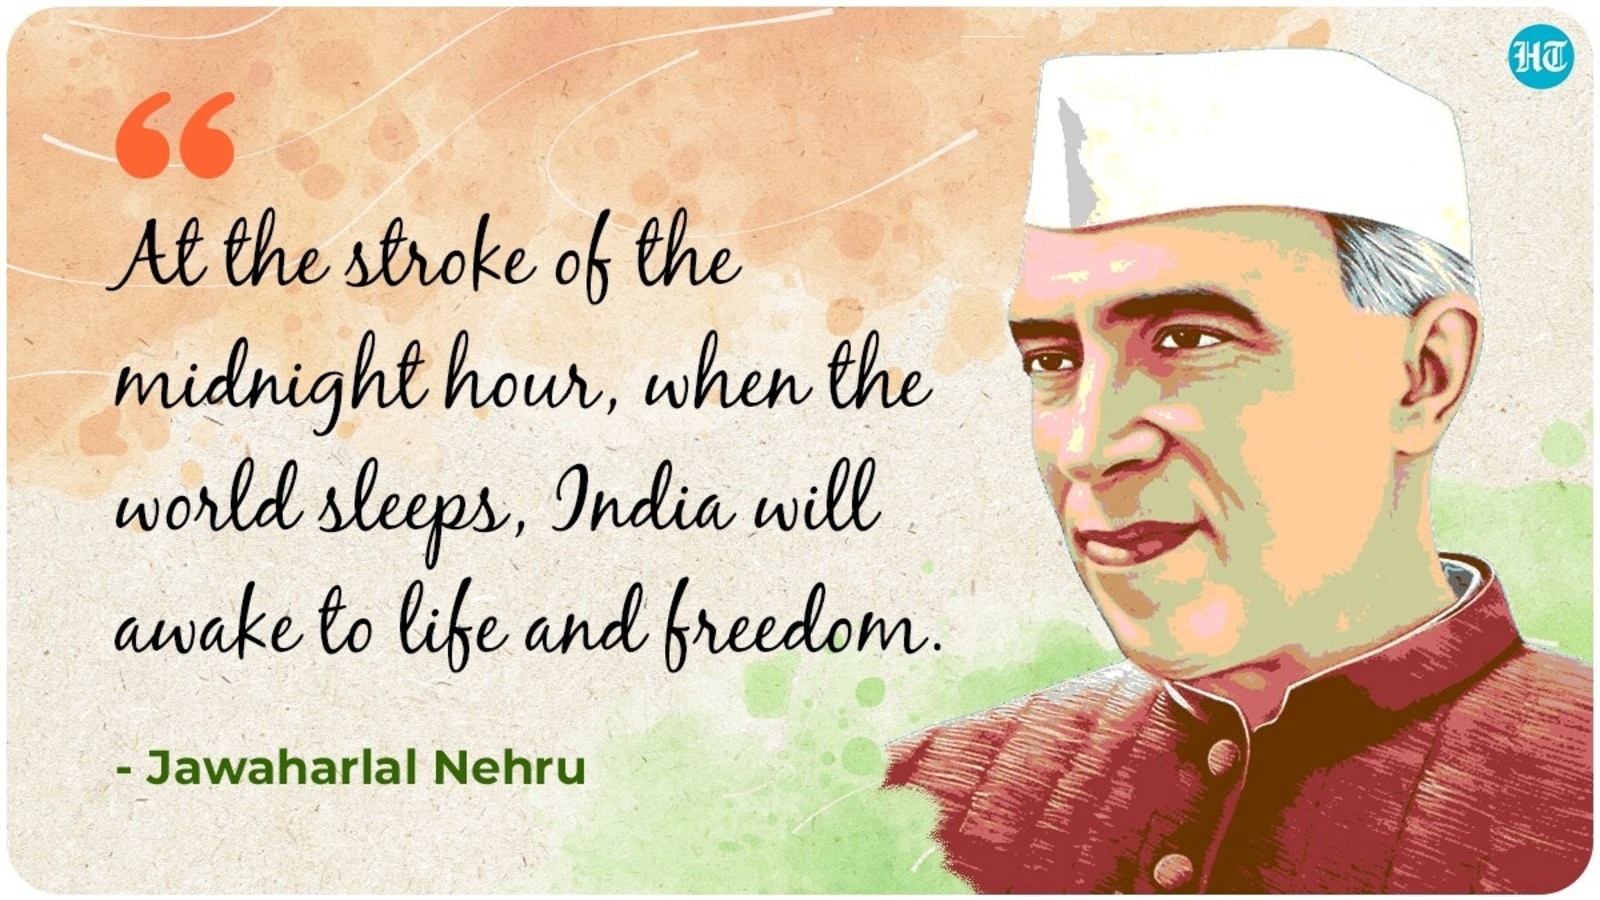 75th Independence Day: Best quotes, images, wishes, messages to